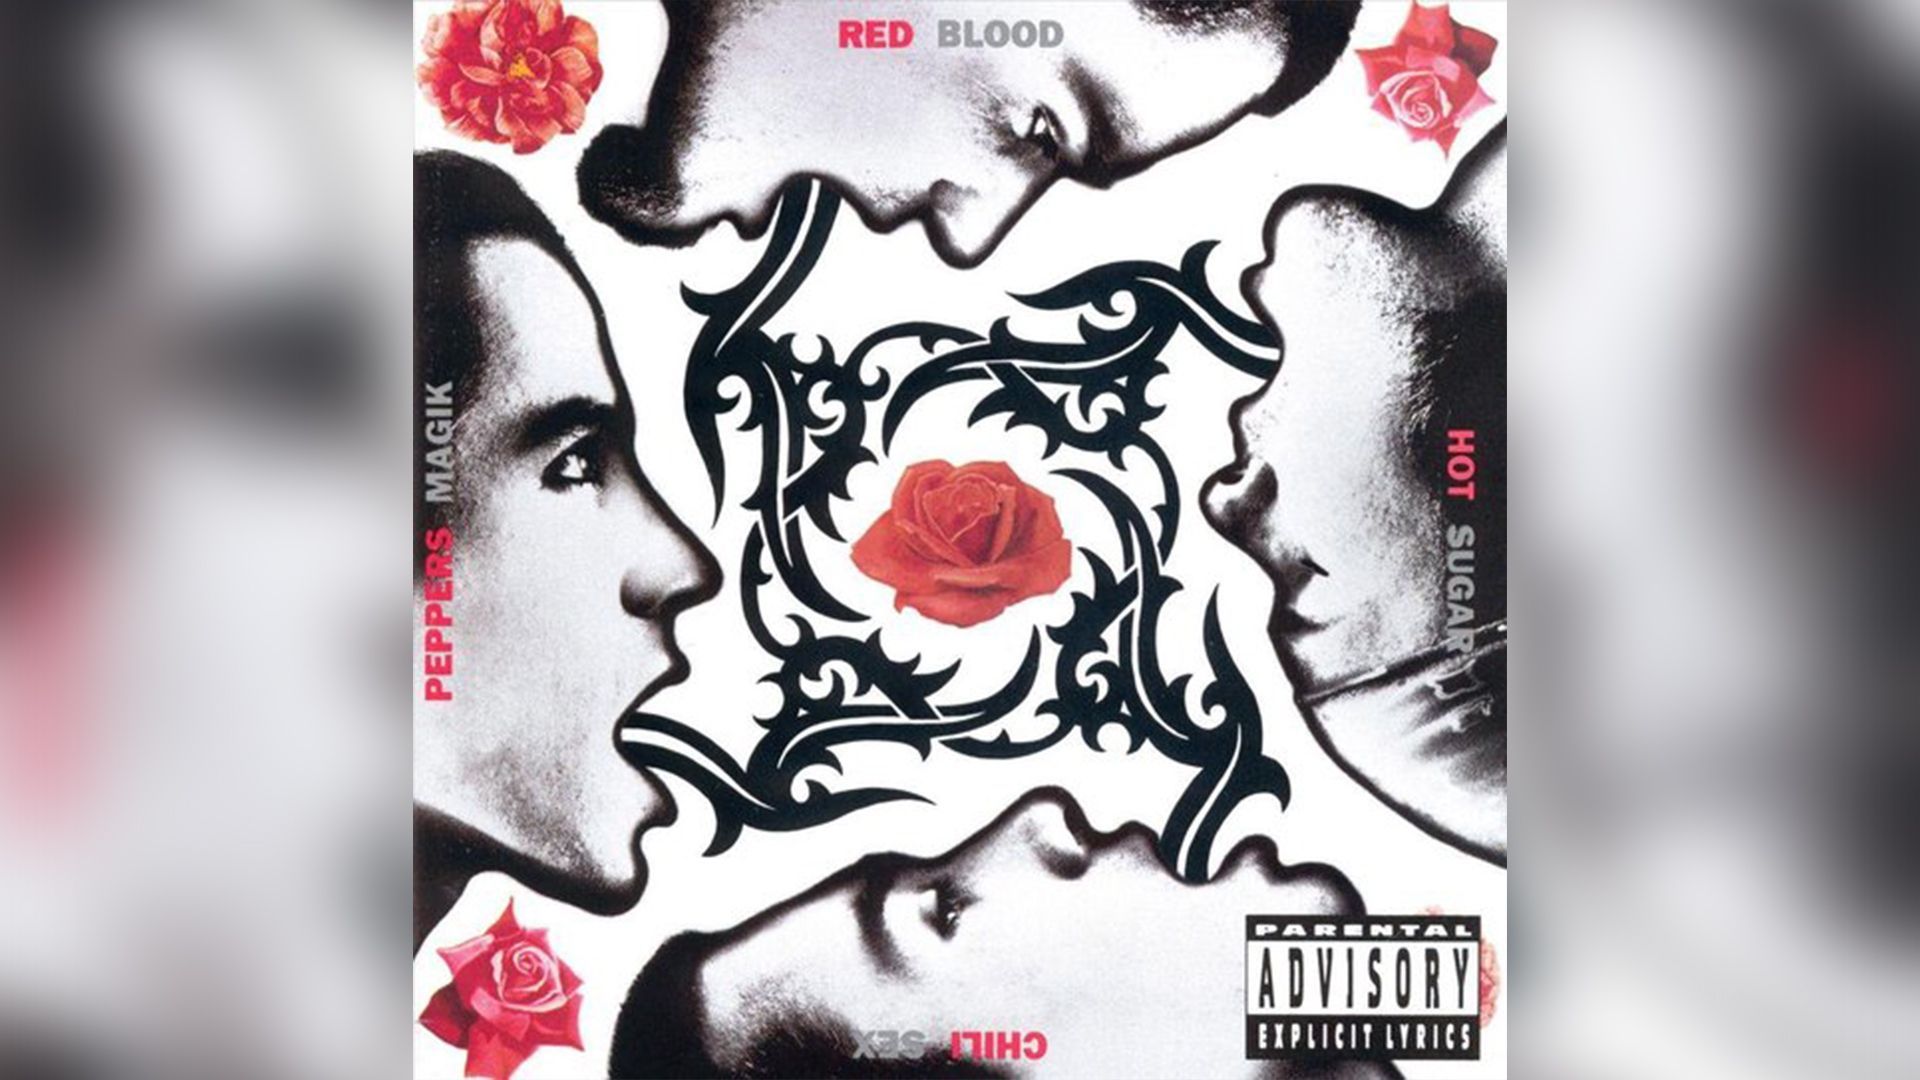 Blood Sugar Sex Magic des Red Hot Chili Peppers